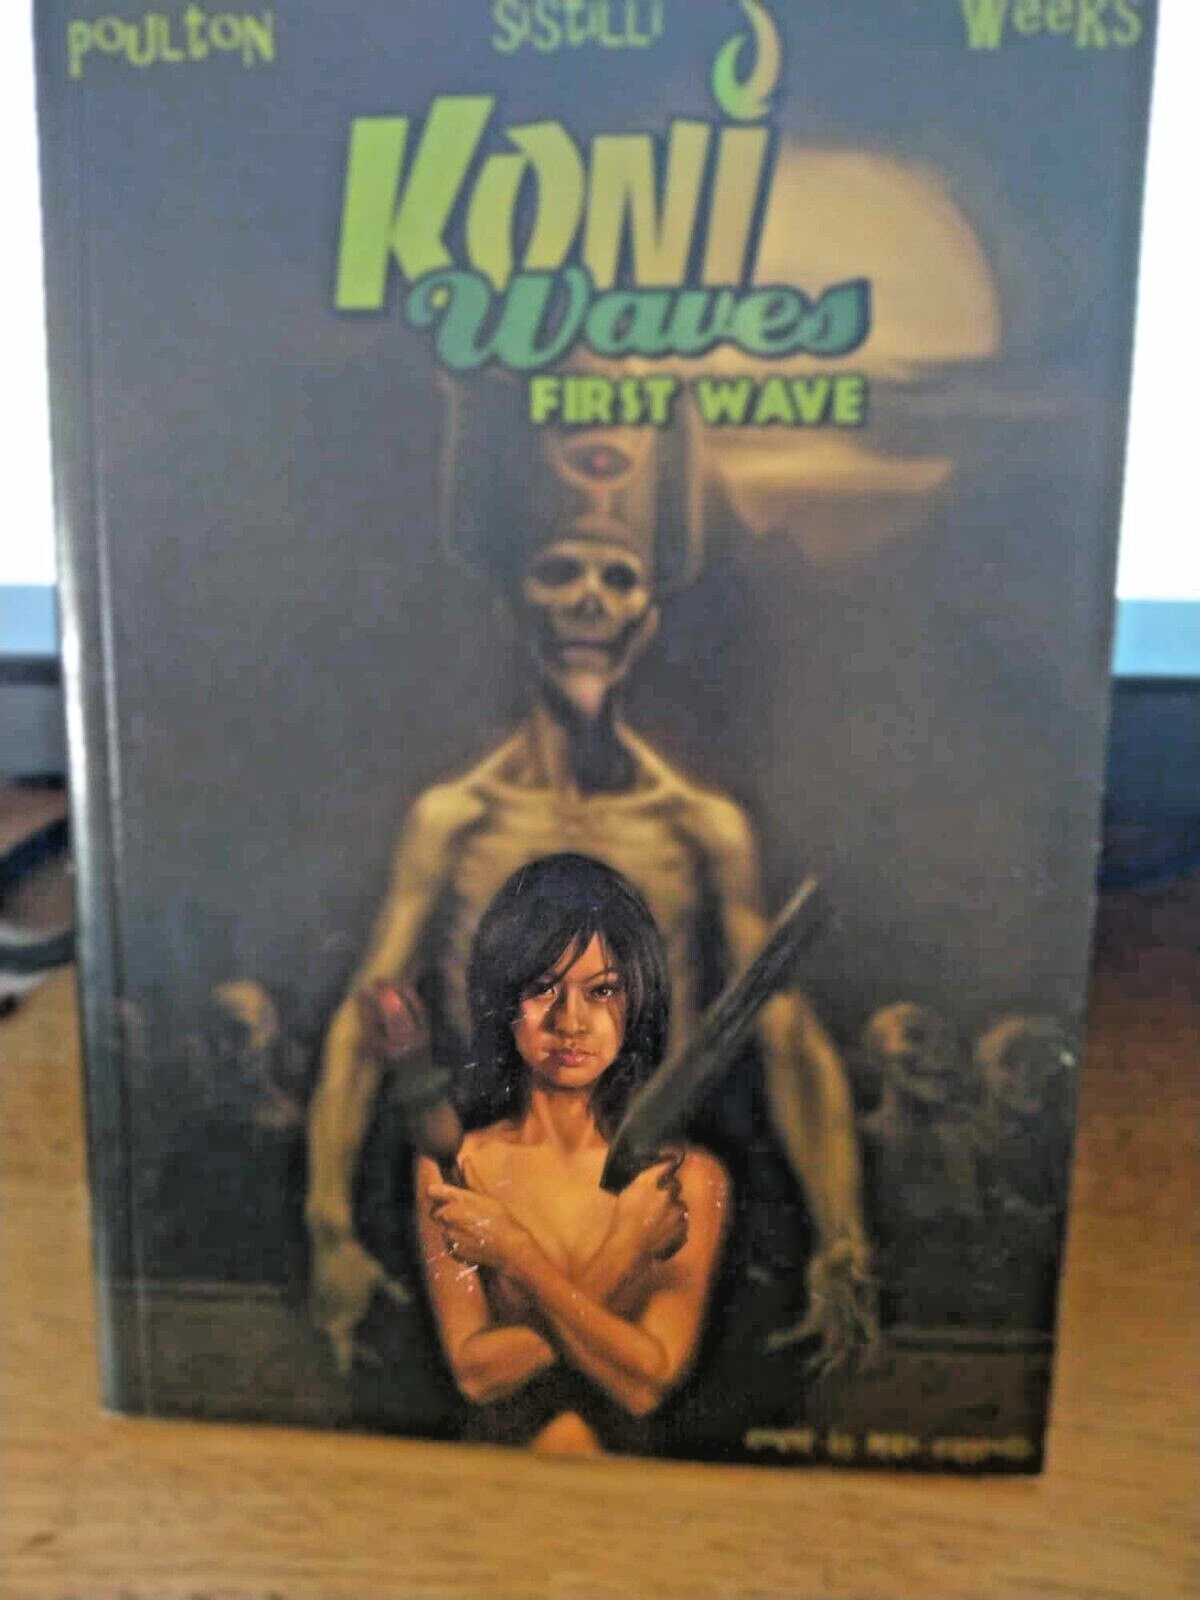 Koni Waves  First Waves Trade  Paperback By Poulton, Mark Graphic Novel Arcana